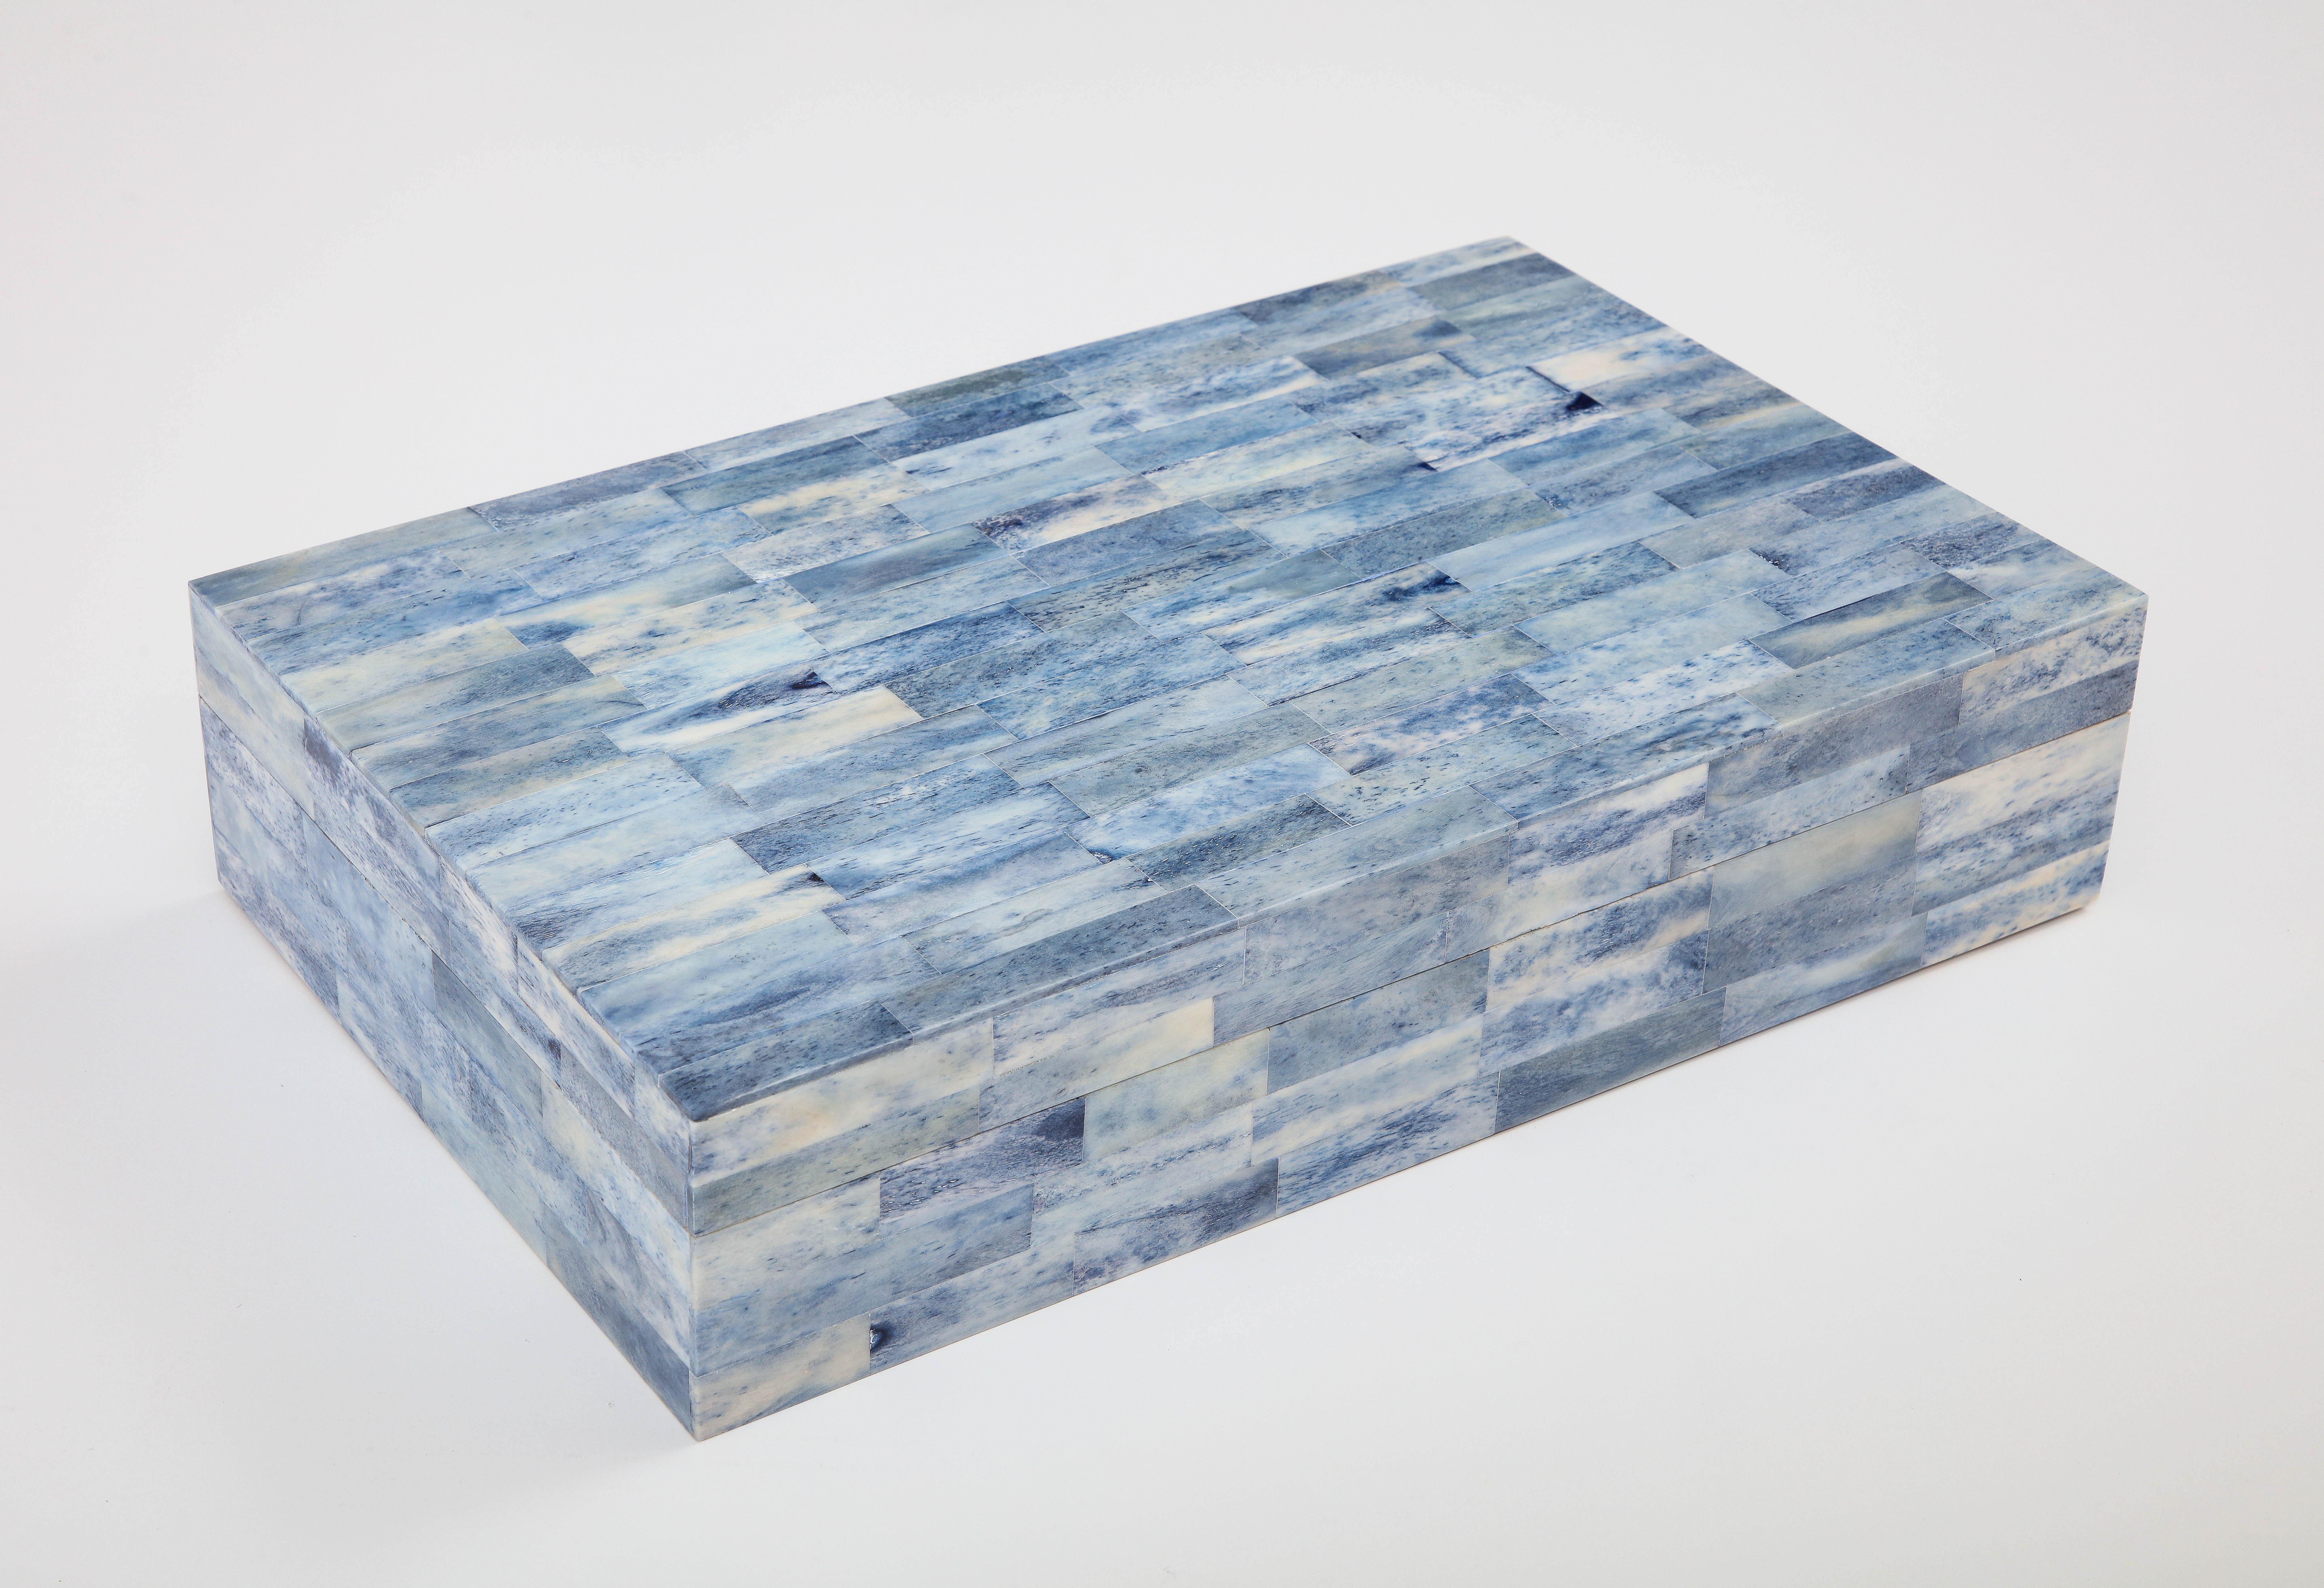 Large scale document/keepsake box in sky blue dyed bone tiles, all hand set on a wood over a wood box. A great storage addition to any coffee table, dresser or desk.